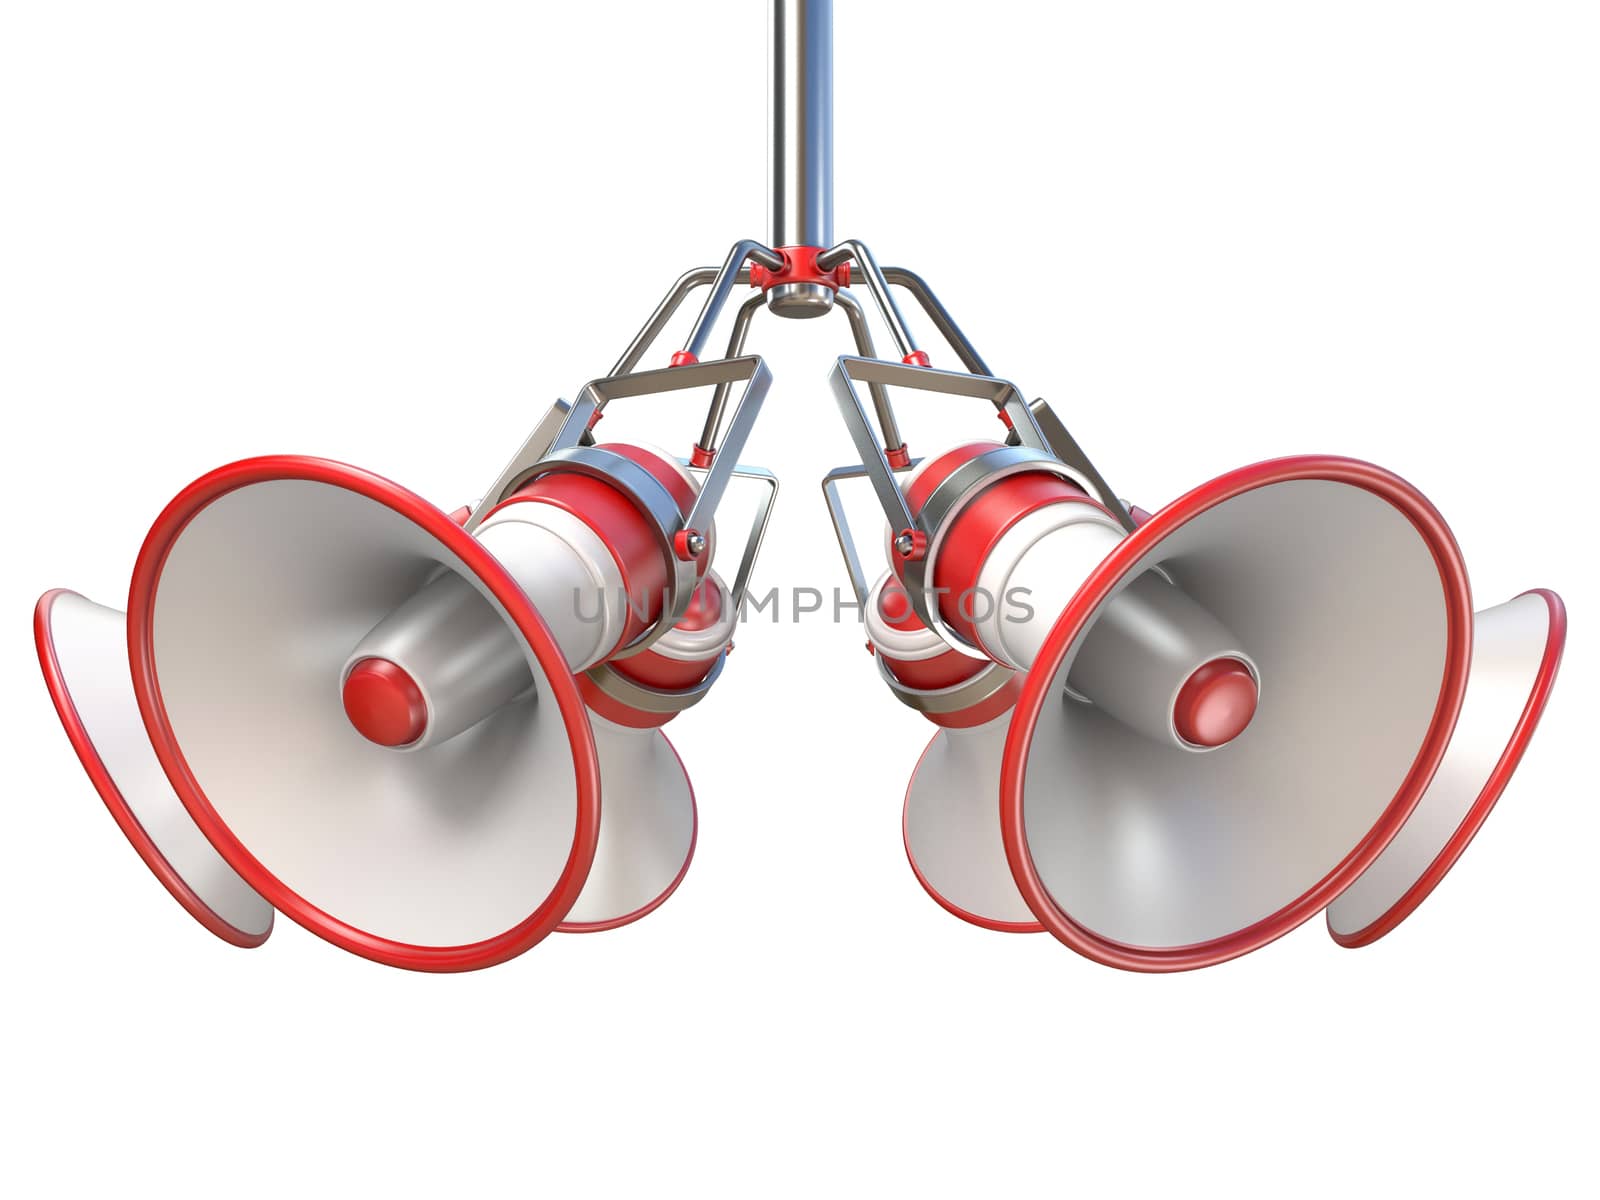 Red and white megaphones hanging 3D render illustration isolated on white background